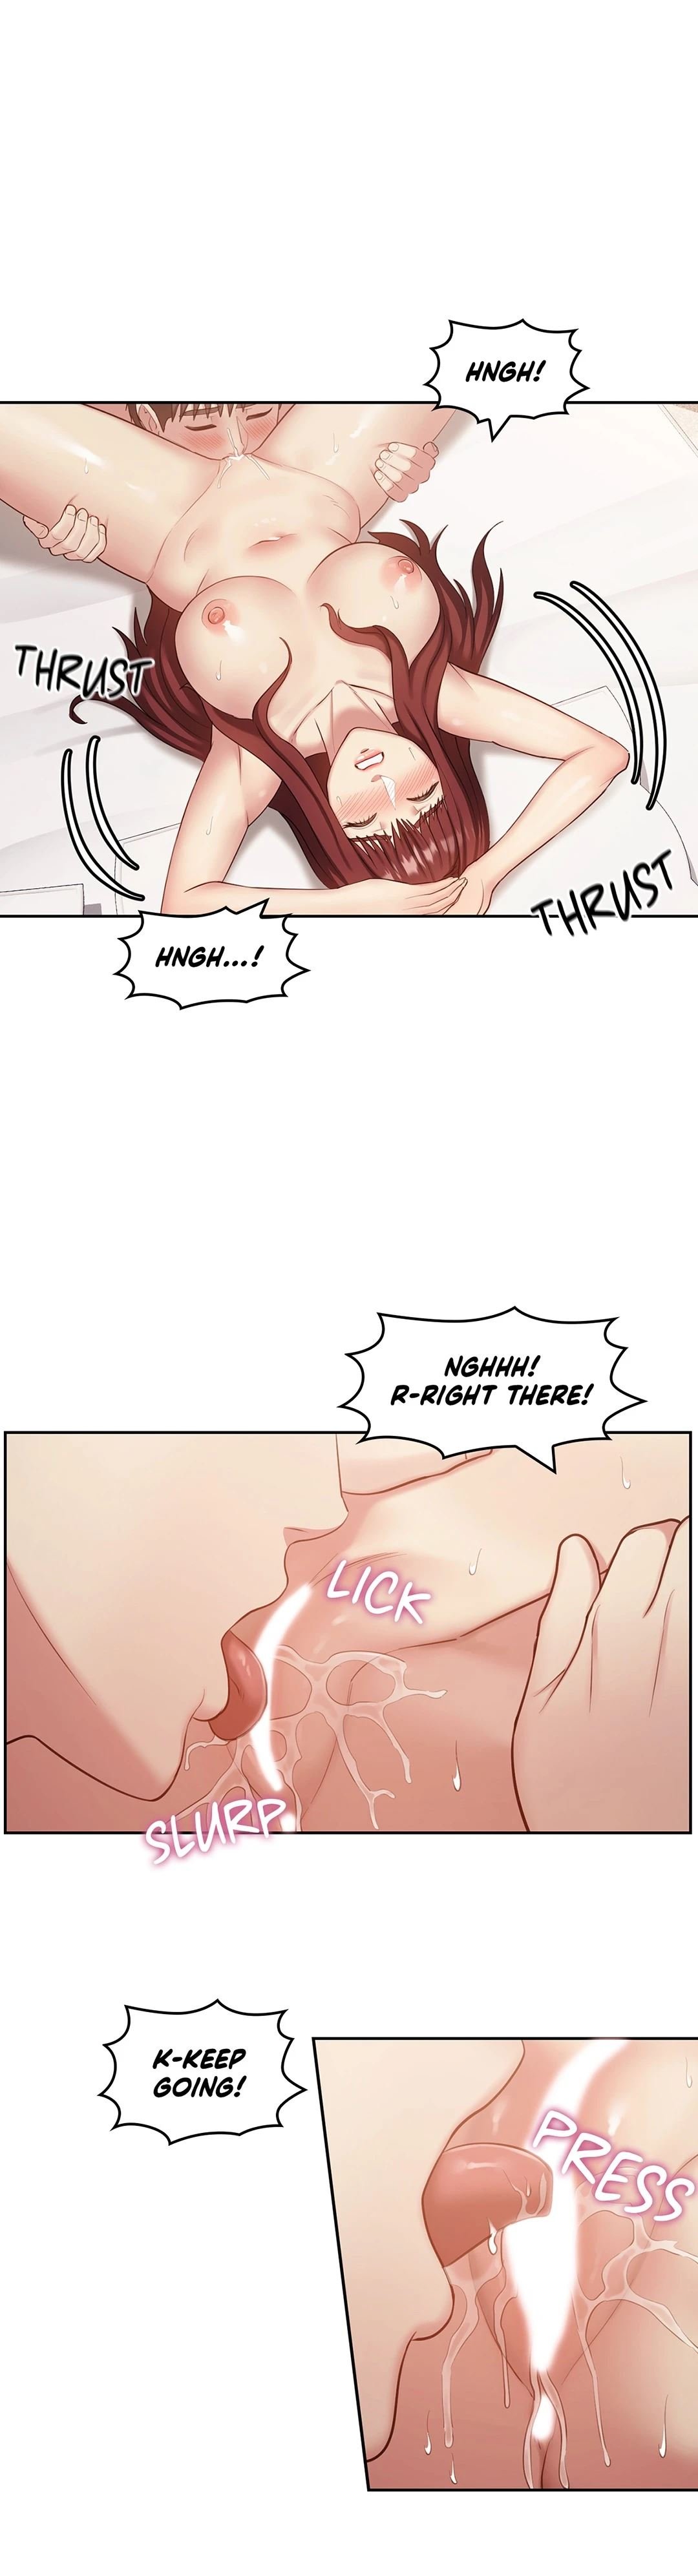 sexual-consulting-chap-39-34